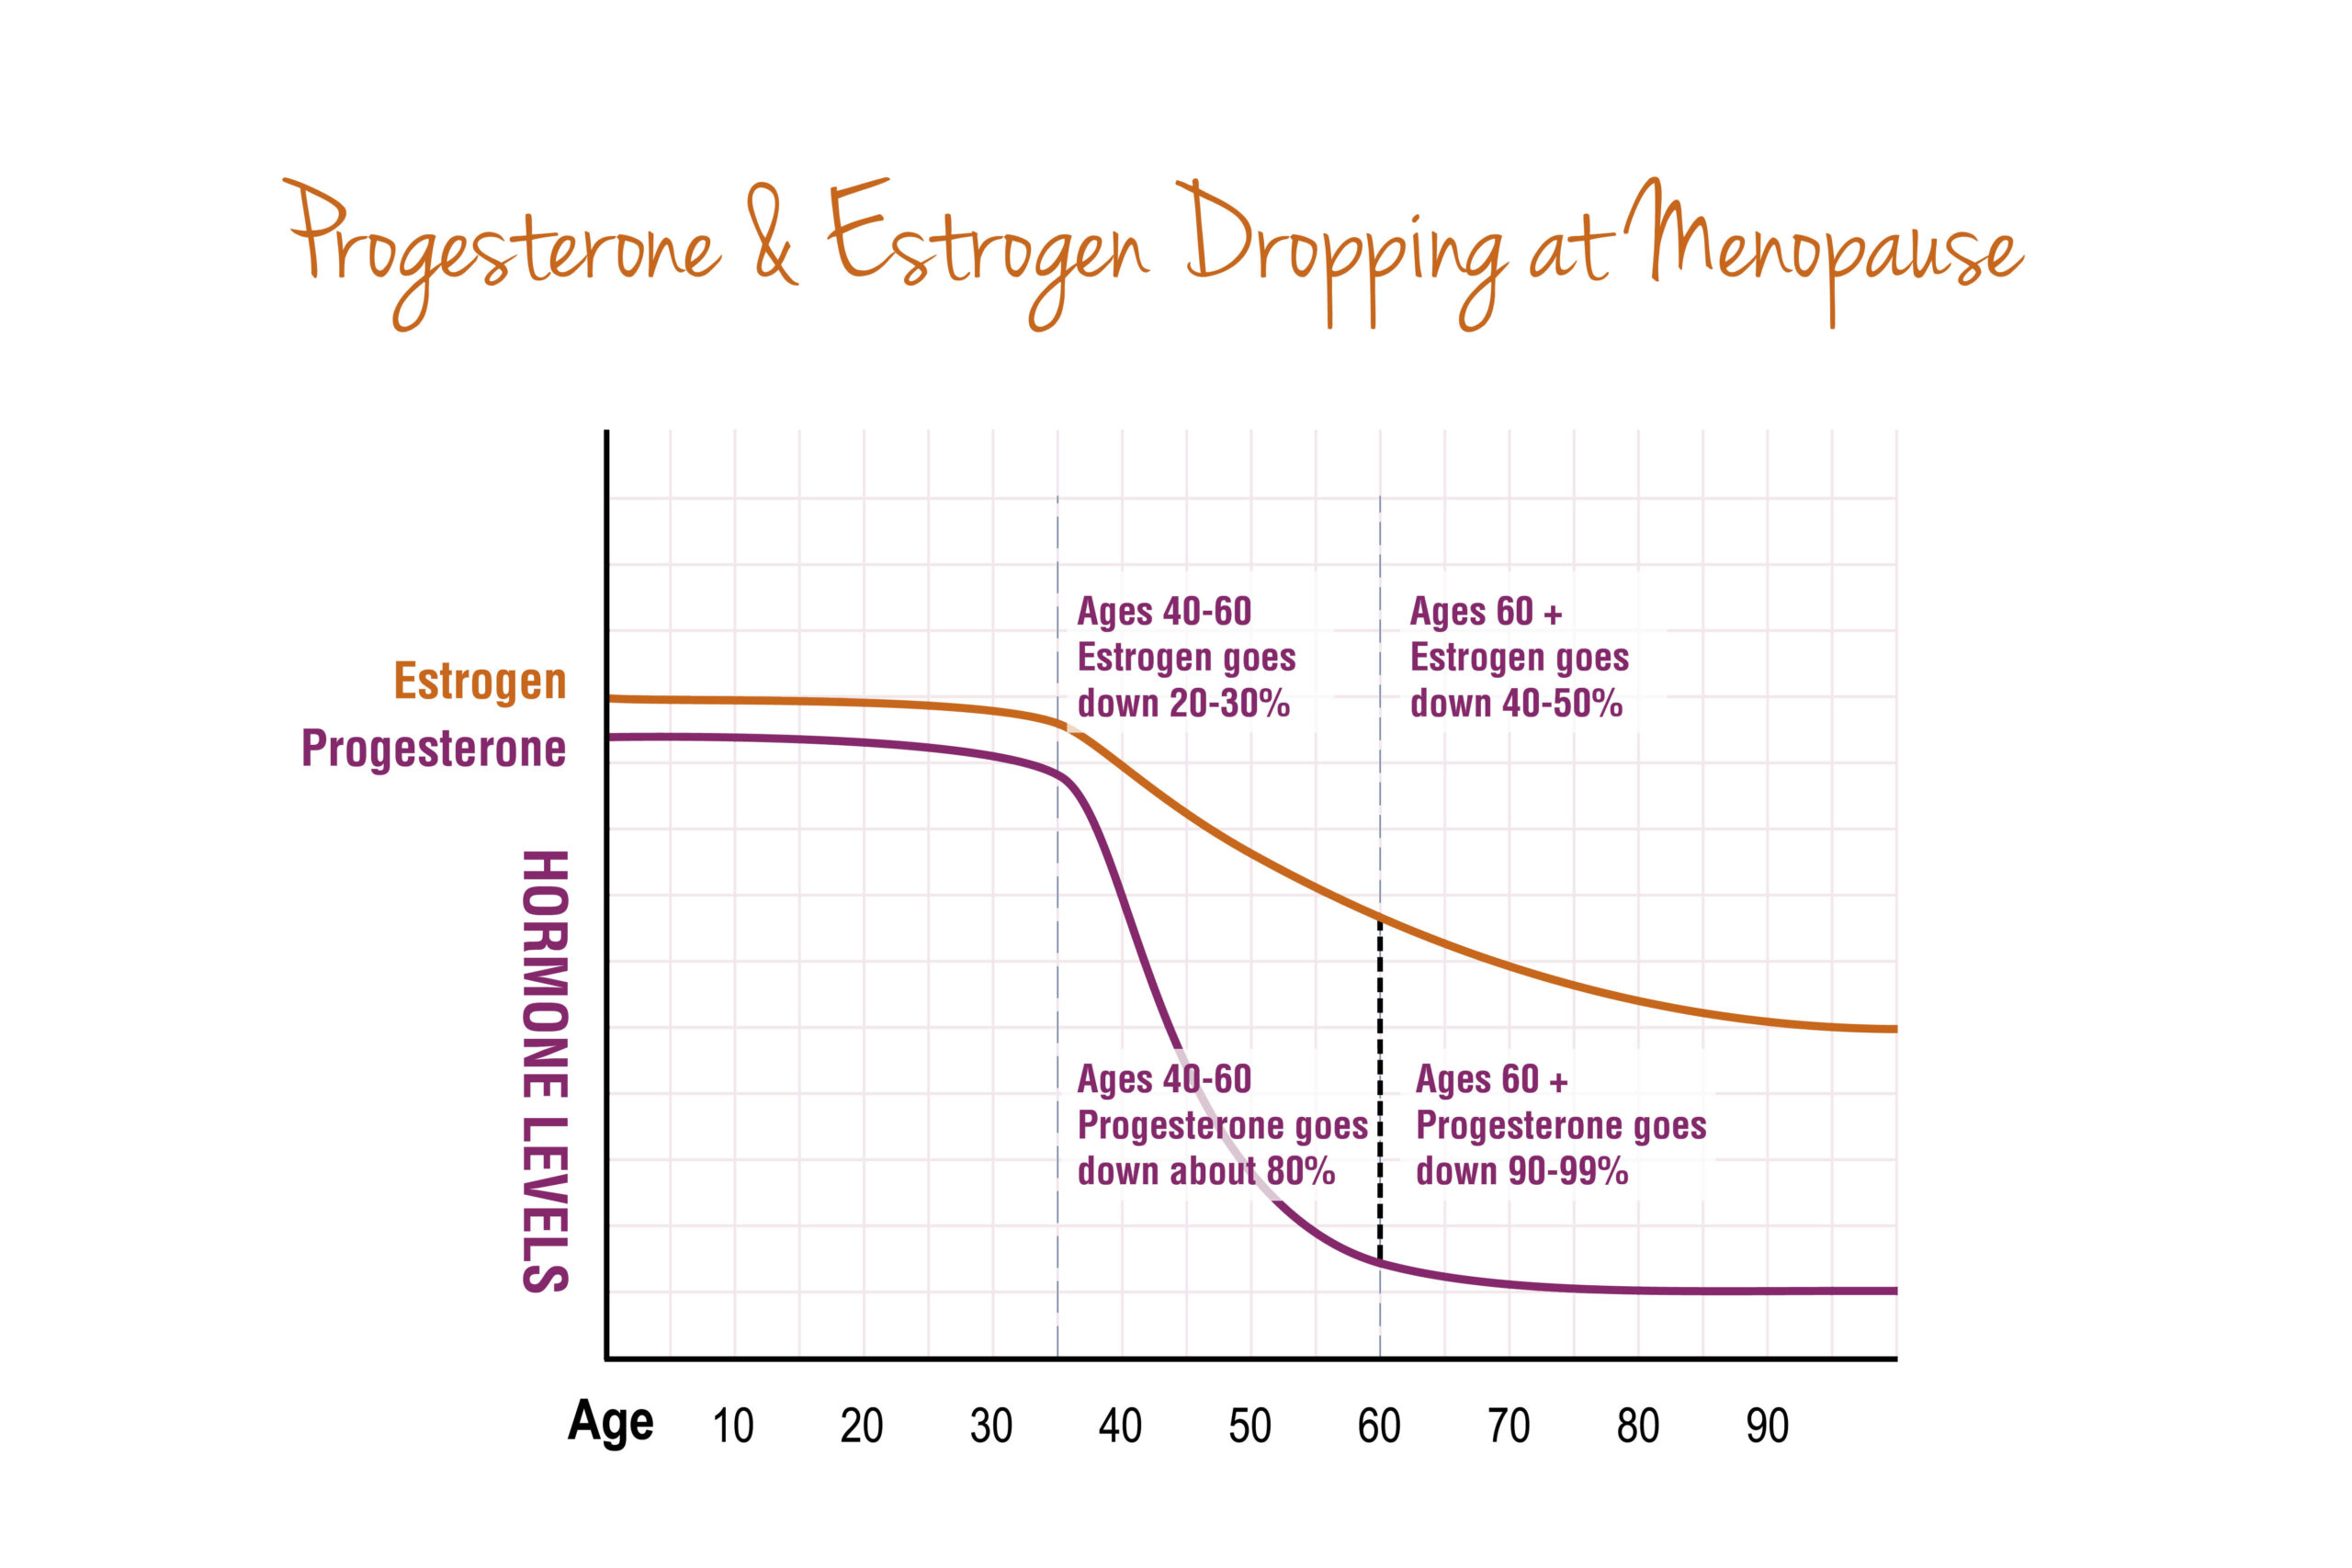 Graph showing progesterone and estrogen dropping at menopause